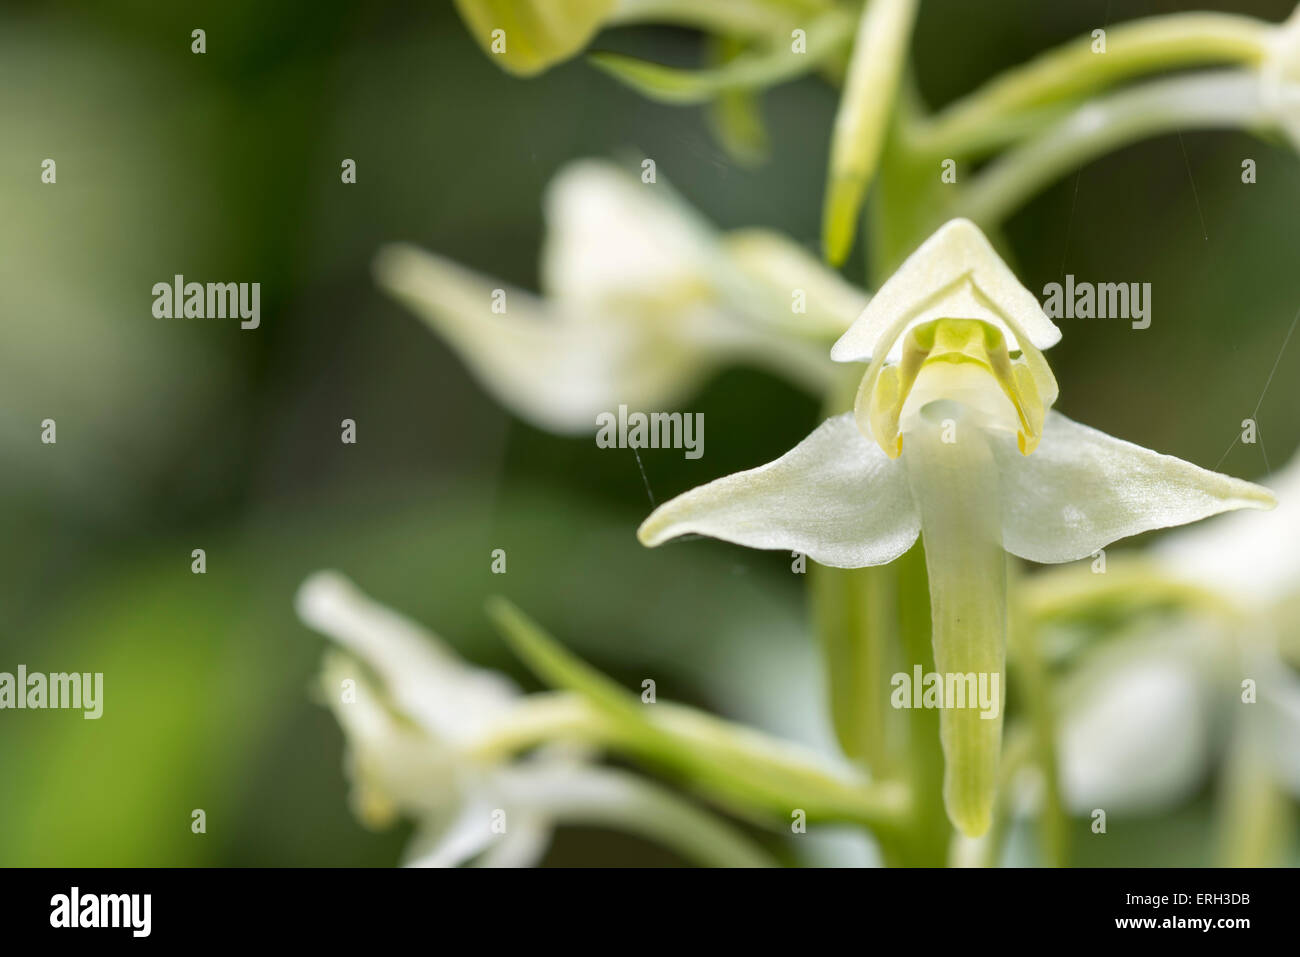 Close up of a Greater Butterfly Orchid flower showing the widely separated pollinaria (pollen sacs) Stock Photo